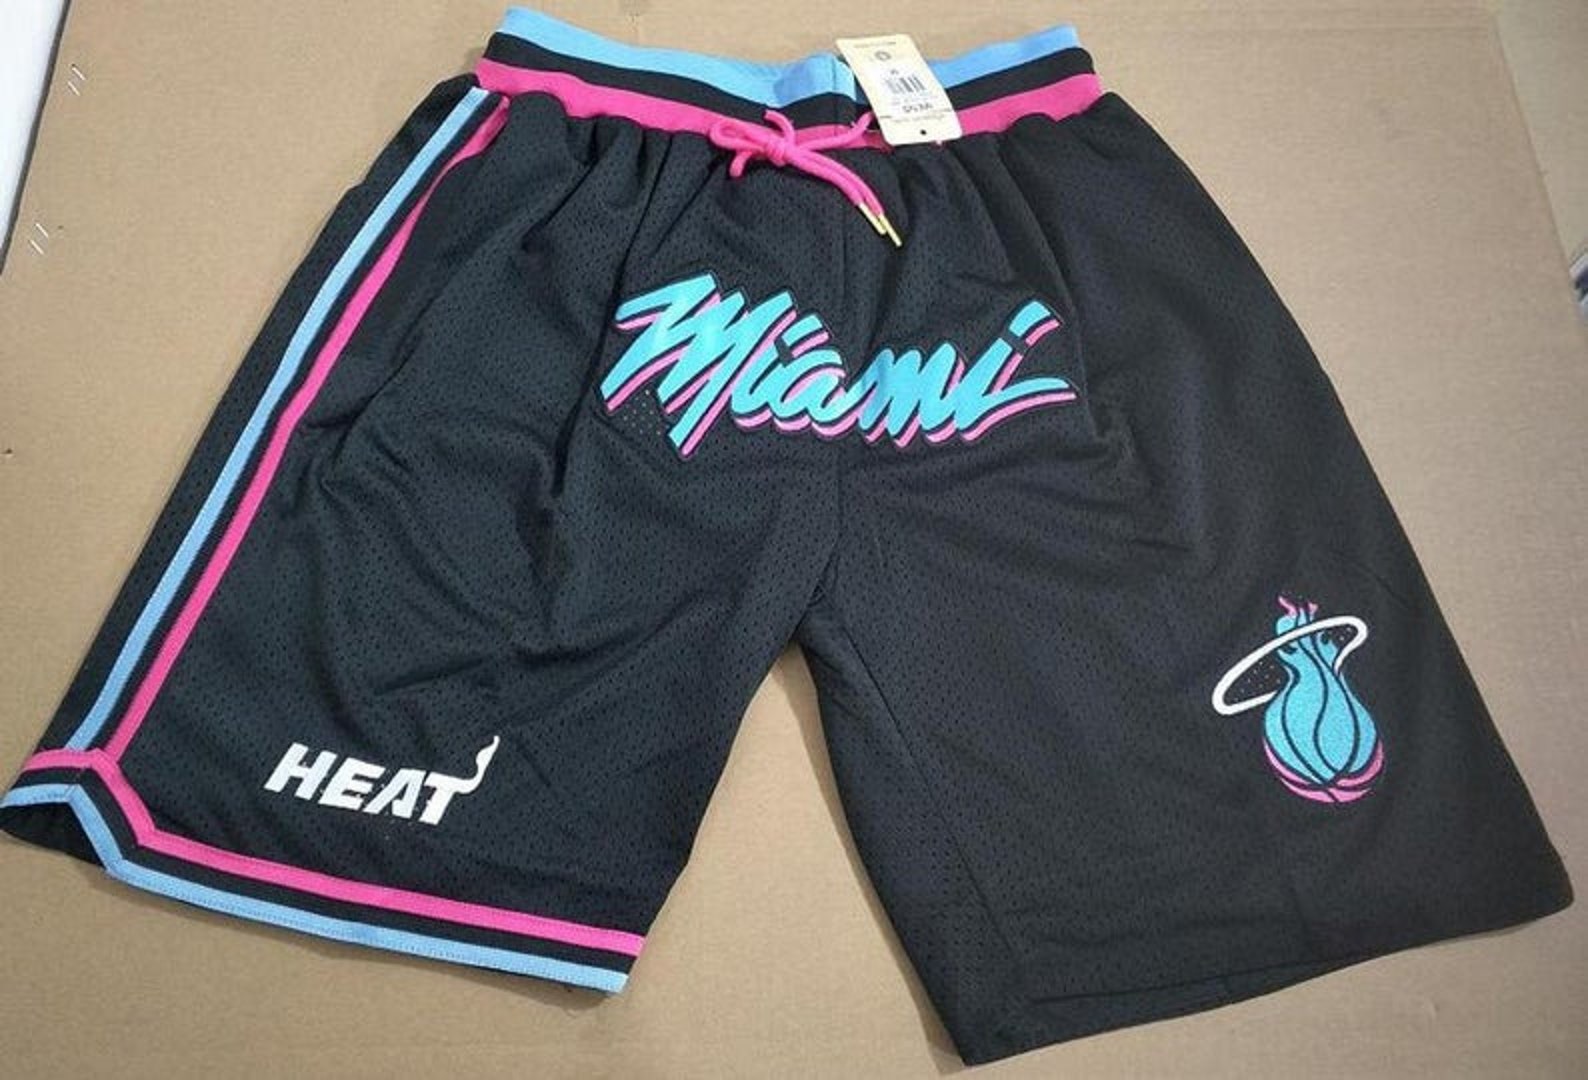 Two Zip Men's Miami Shorts Stitched Size S-2XL | Etsy